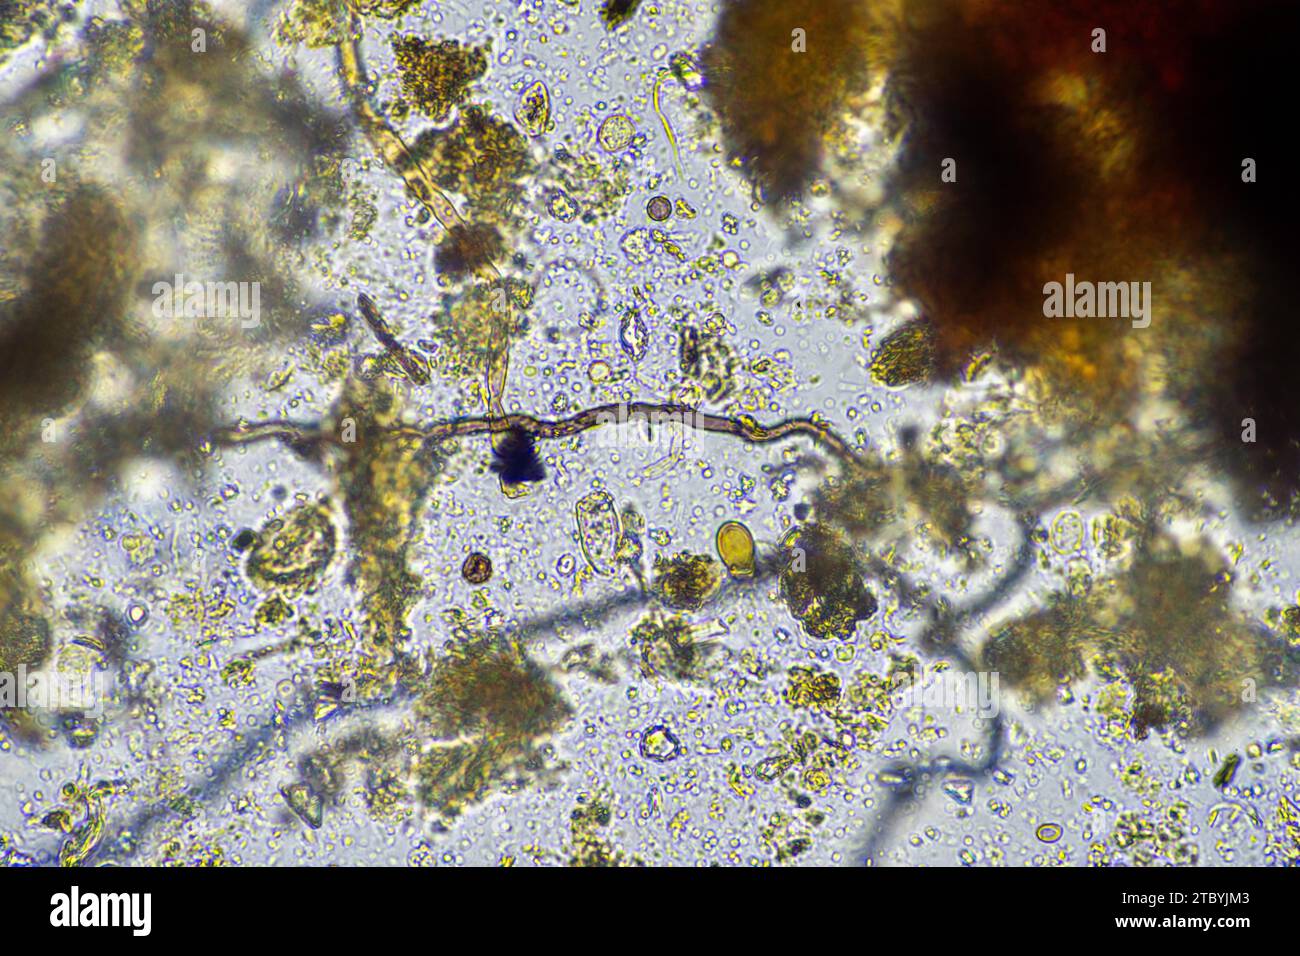 Microorganisms and biology in Compost and soil sample under the microscope Stock Photo